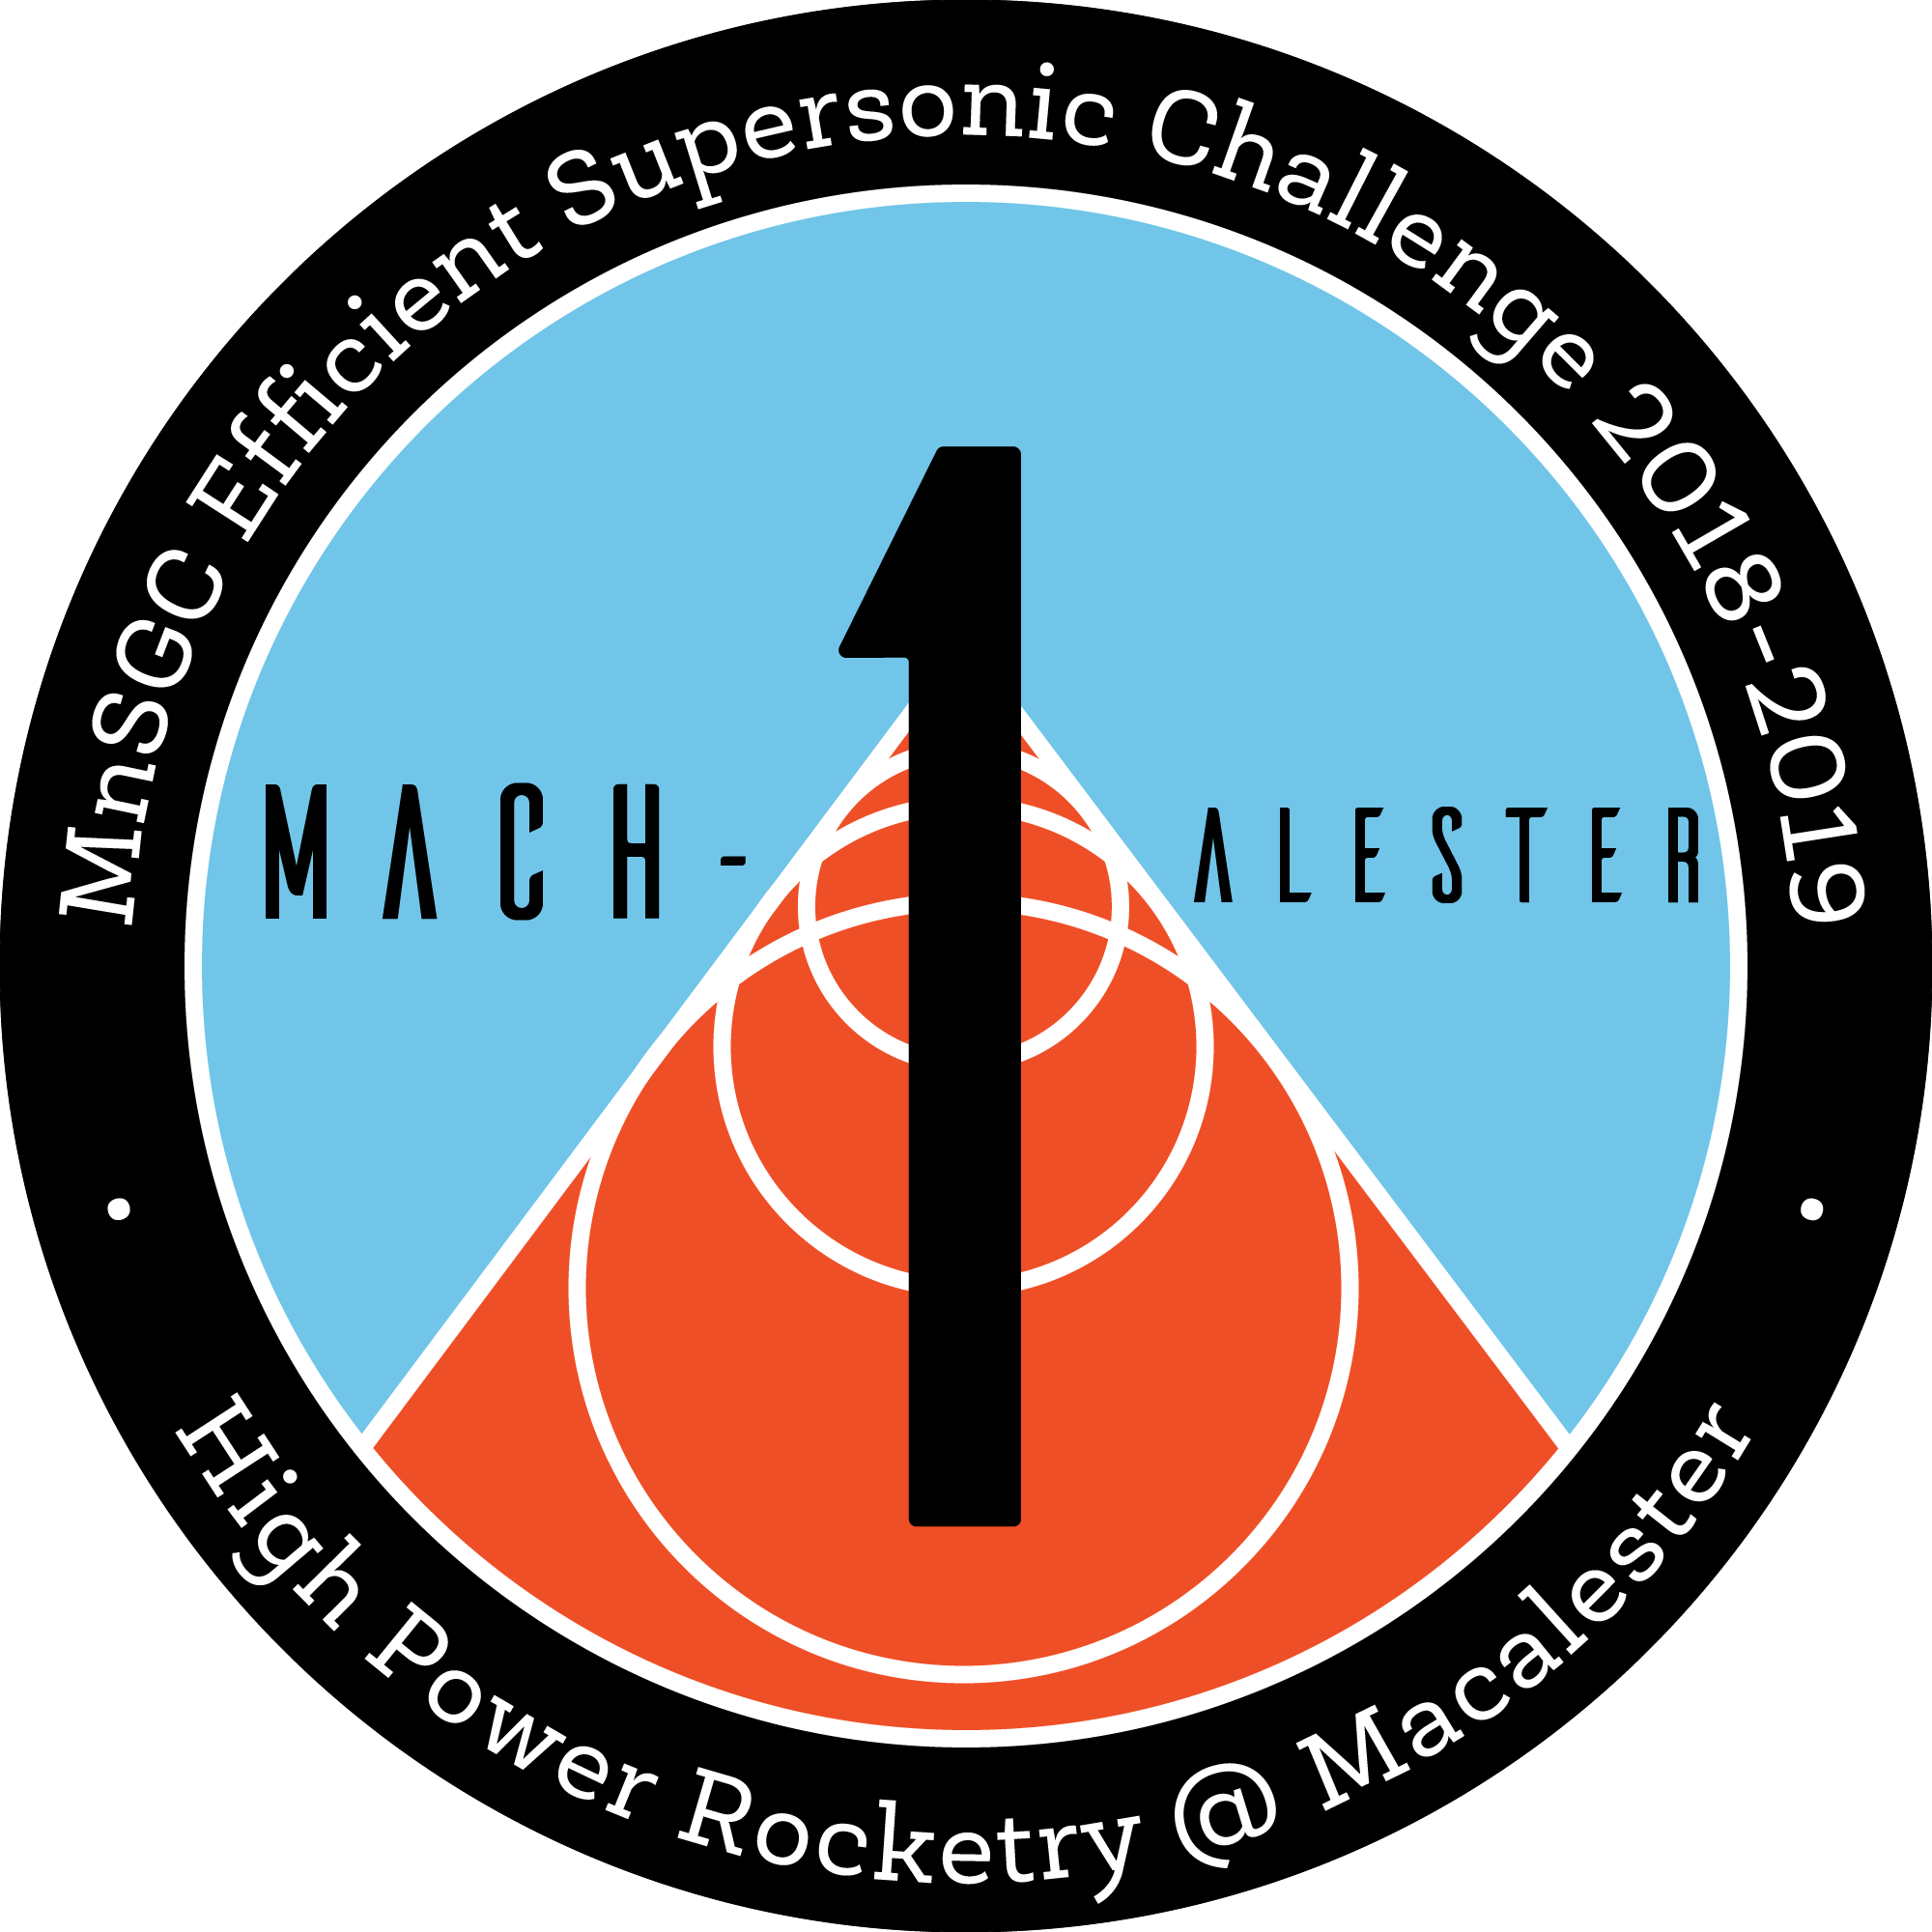 Mach-alester I mission patch